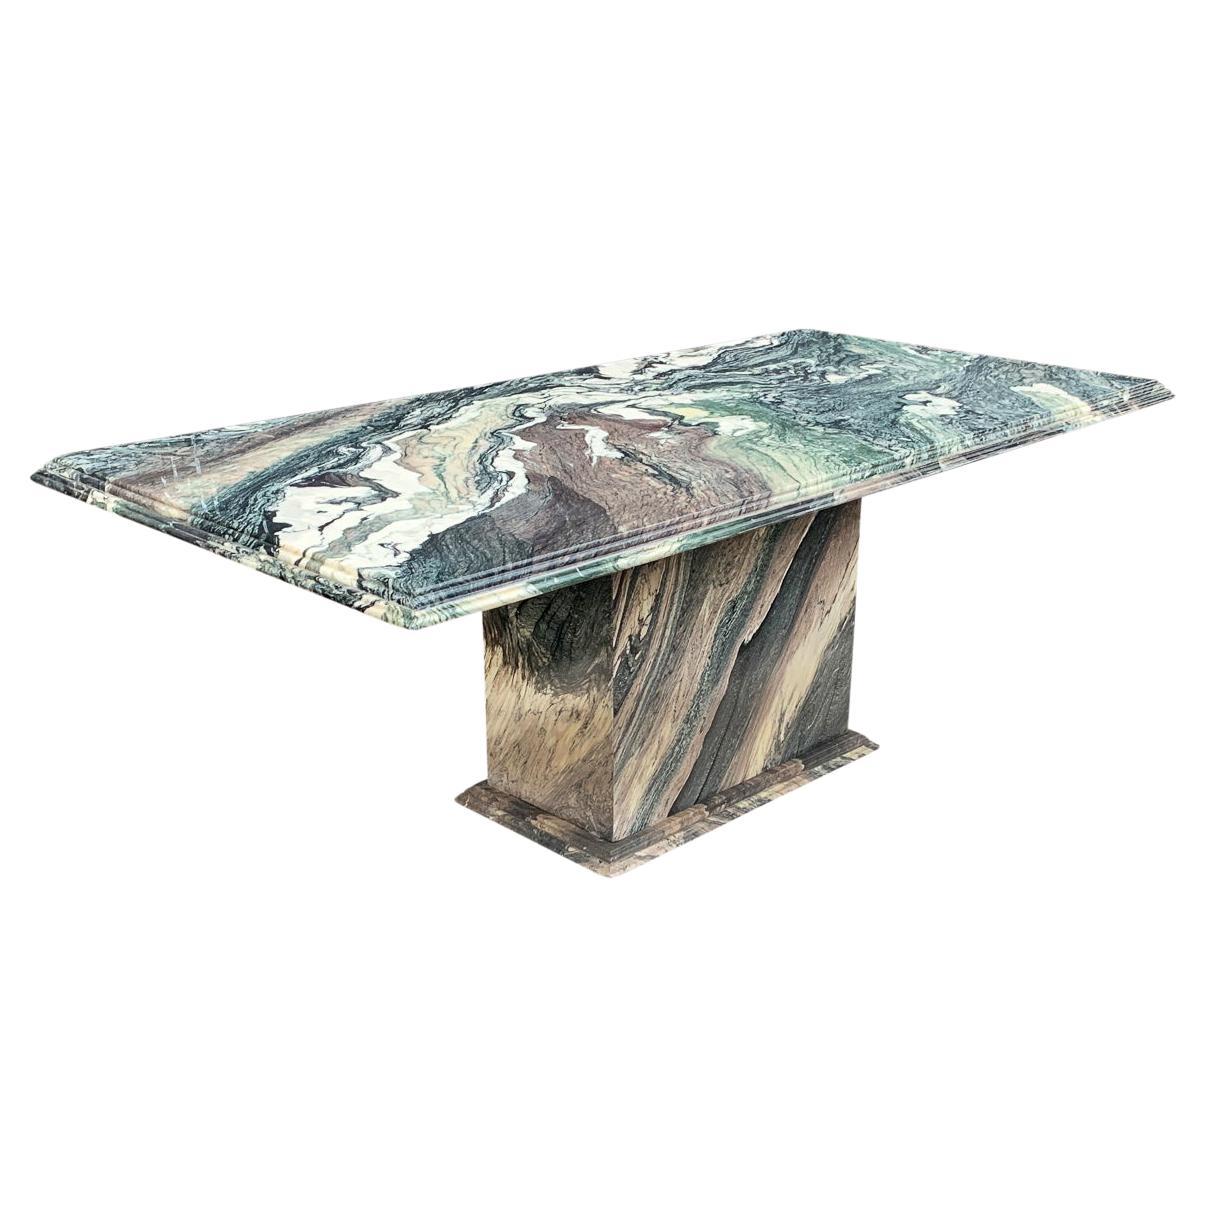 Stunning! Large vintage Cipollino Ondulato marble dining table, designed and manufactured in Italy. This table has a strong formal design with rich veining accentuating the highest quality of marble. Features a generous rectangular top where you can